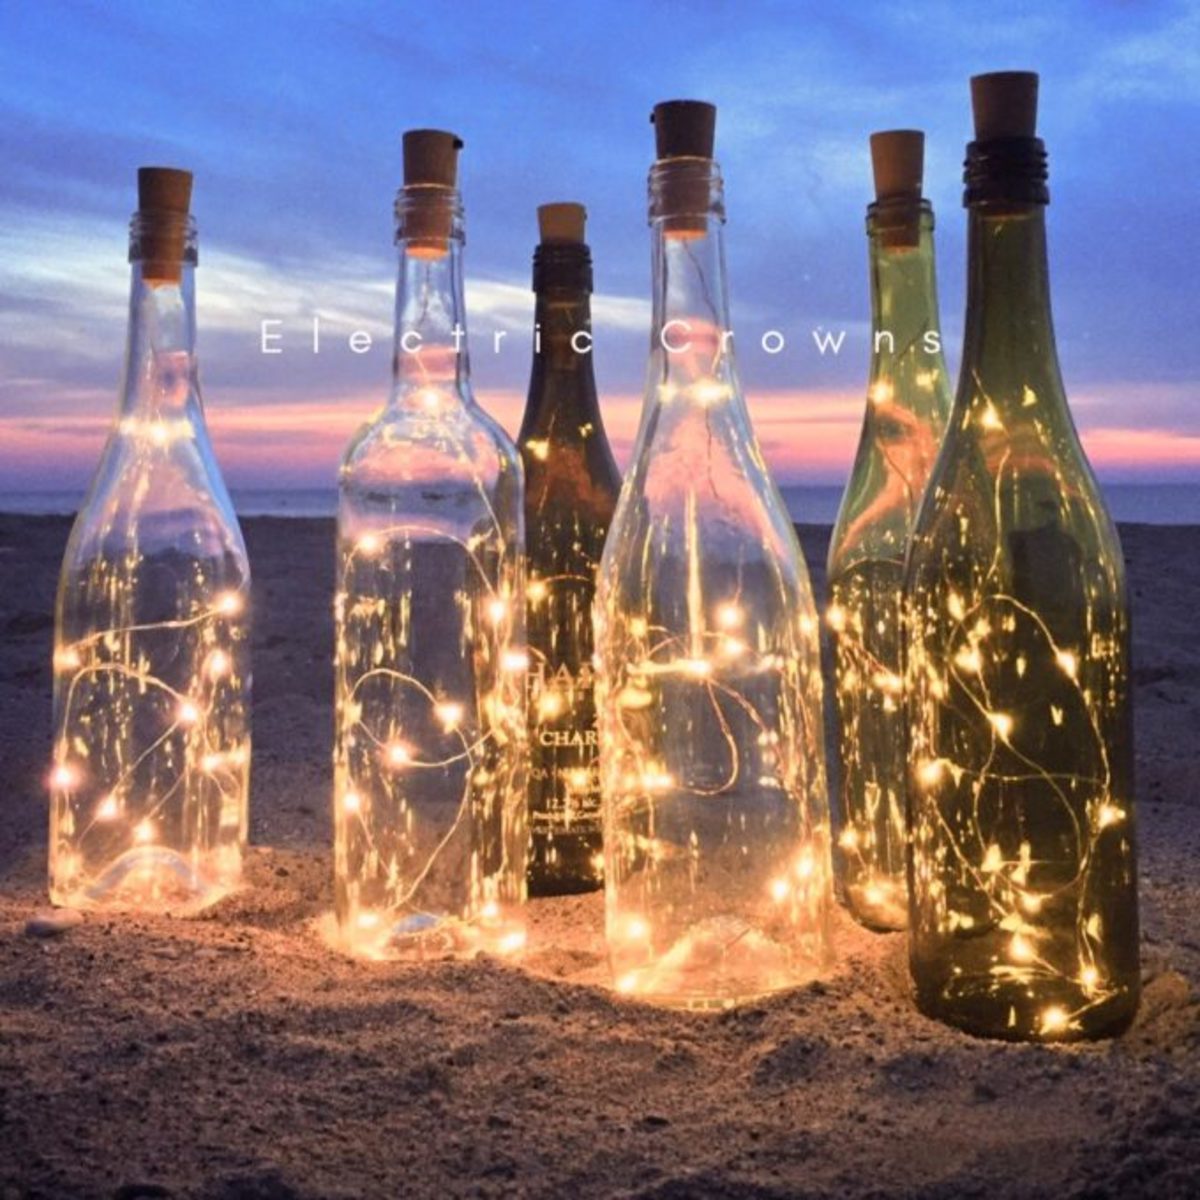 Use some empty wine bottles with some fairy lights to create some lighting for your reception.